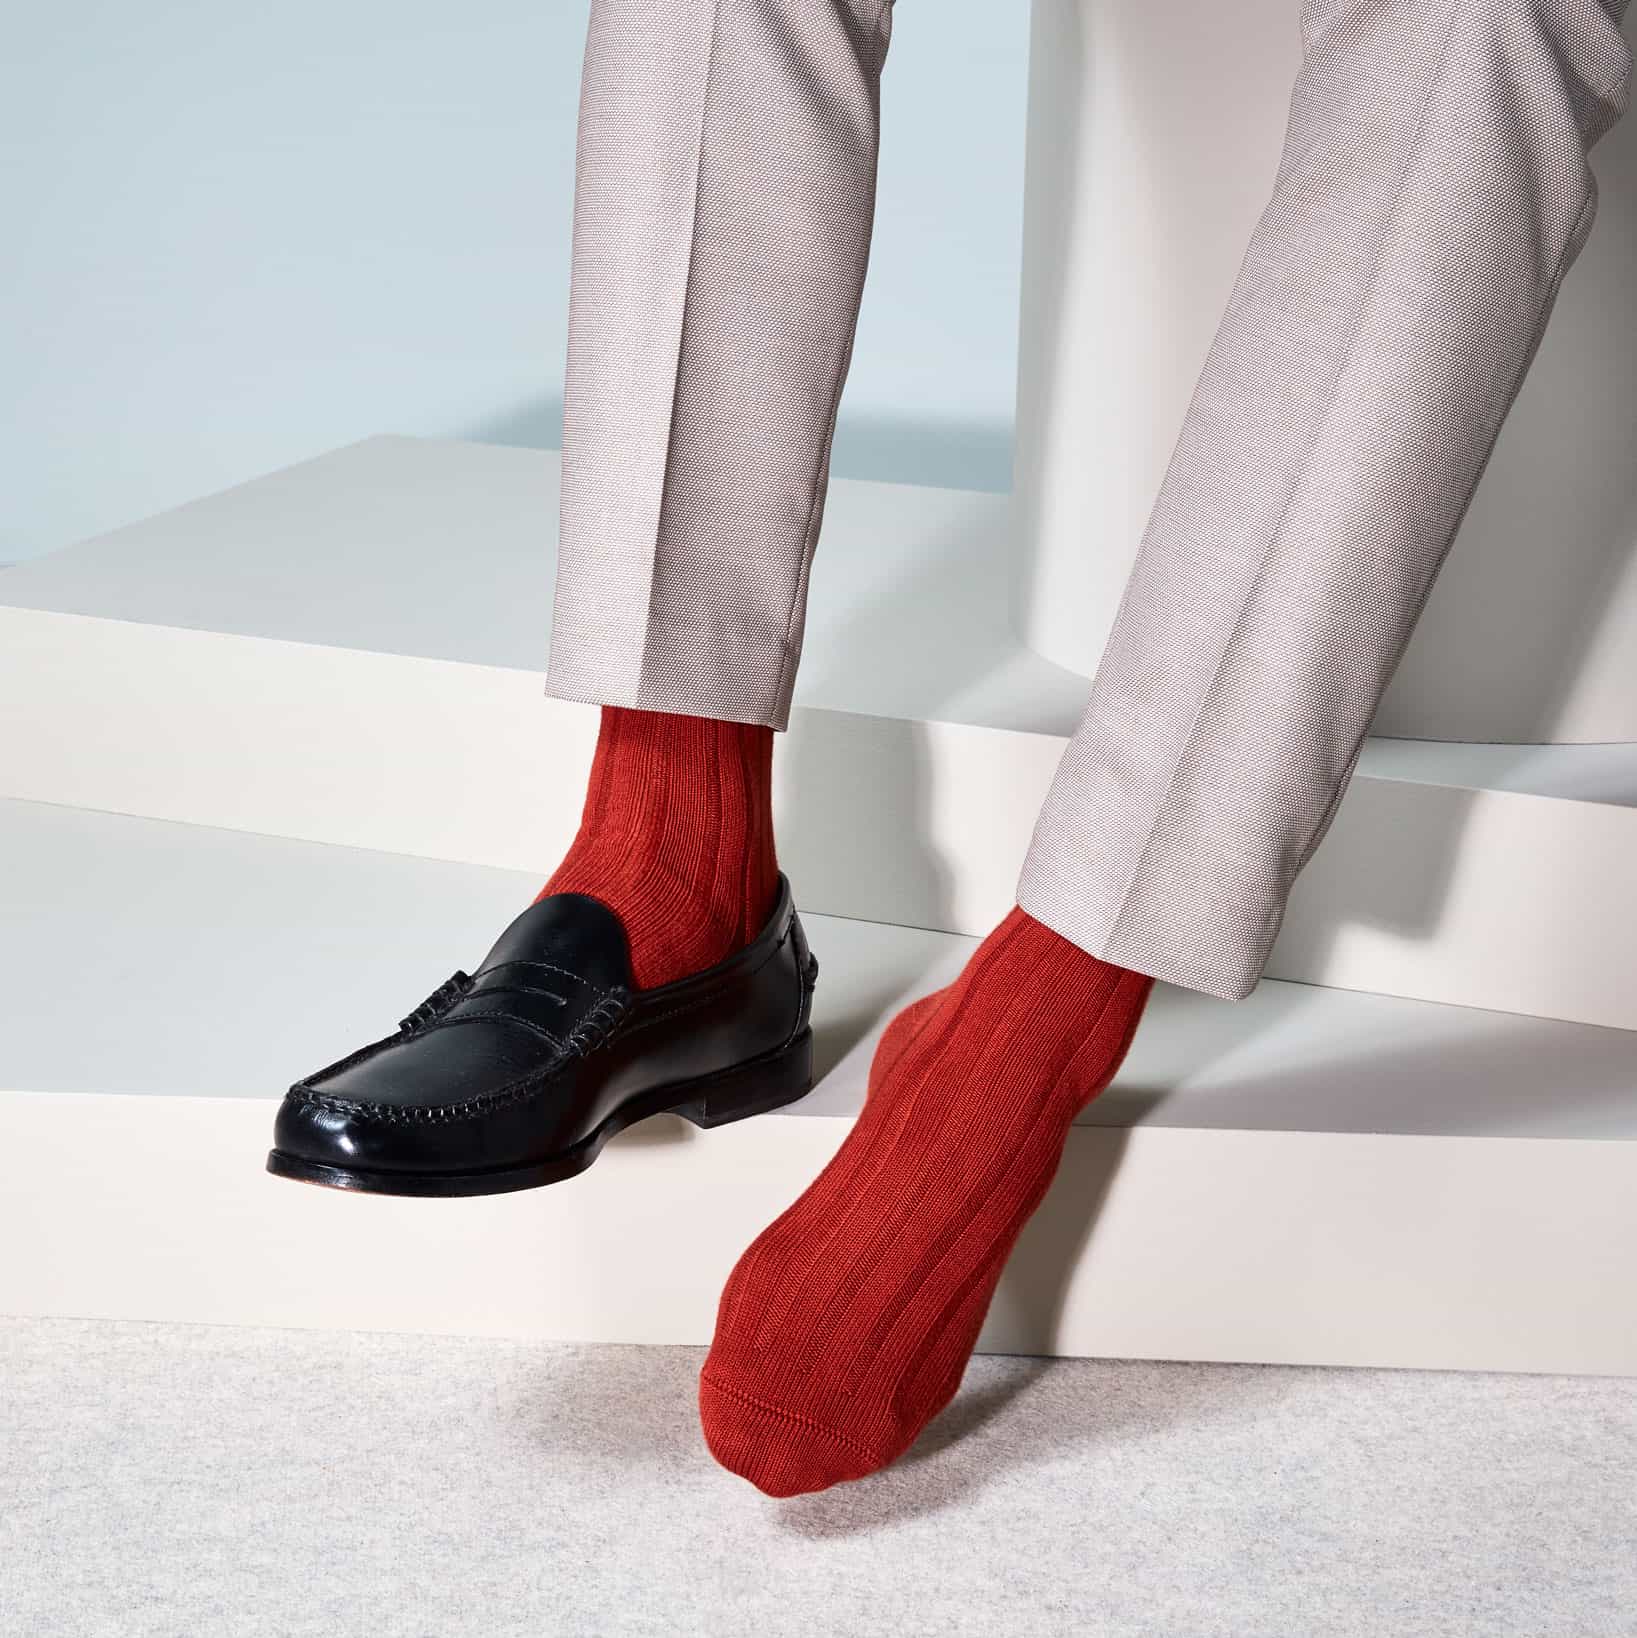 Tabio Is Not Just a Sock, It's a Testament to Japanese Craftsmanship